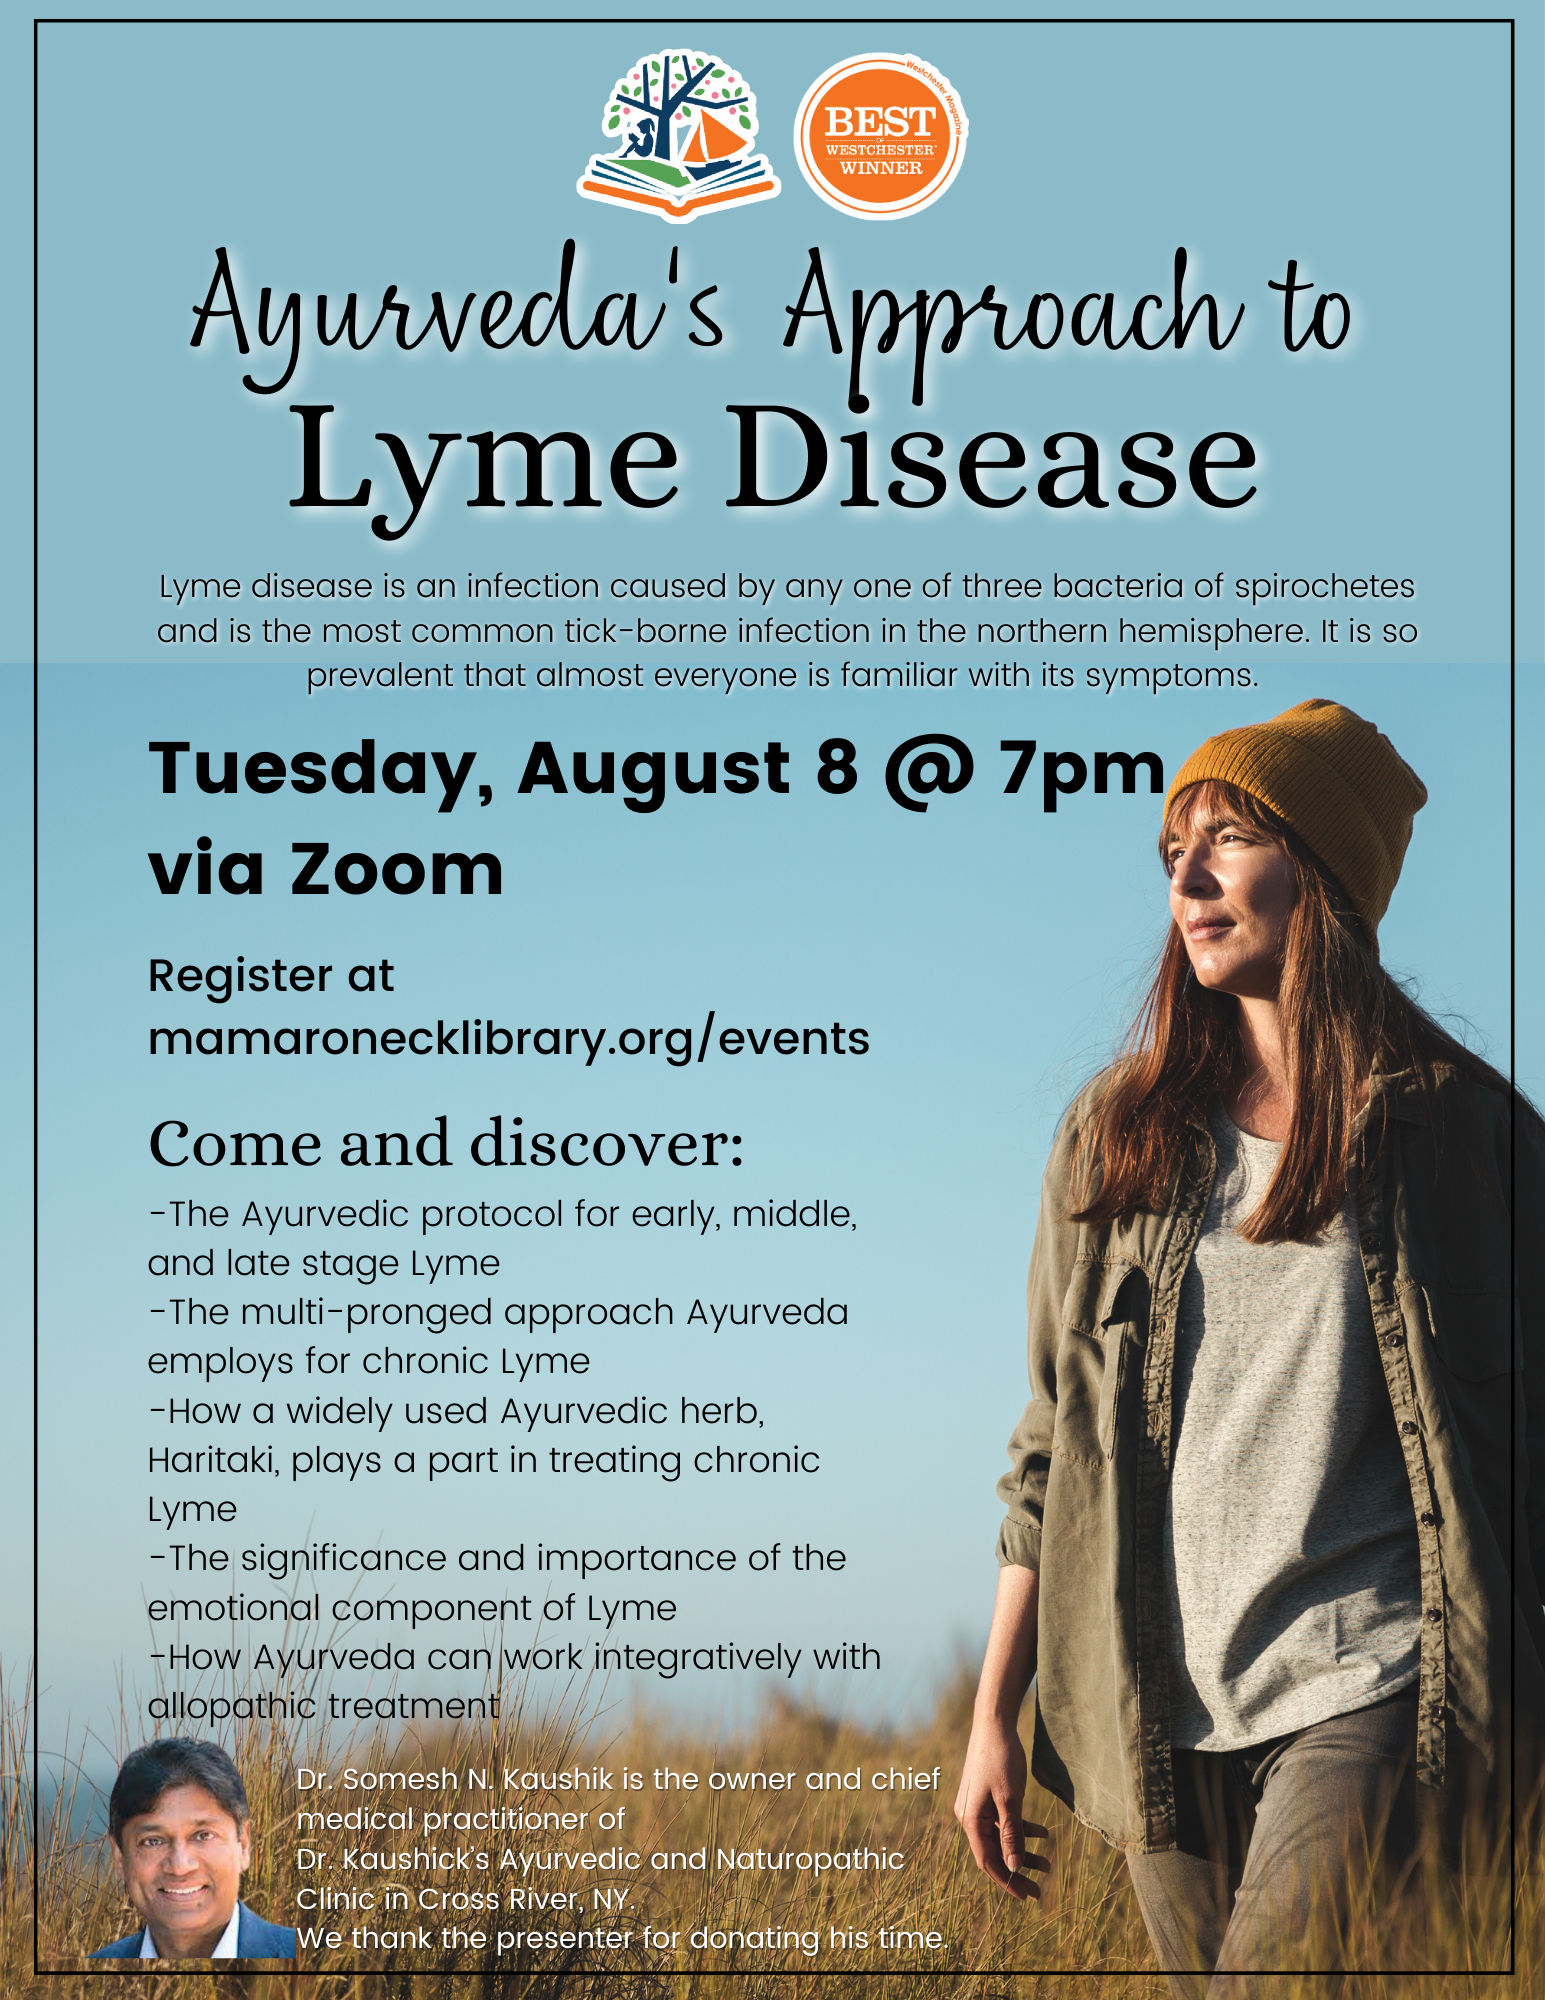 via Zoom - 8/8 @ 7pm - Ayurveda's approach to Lyme Disease